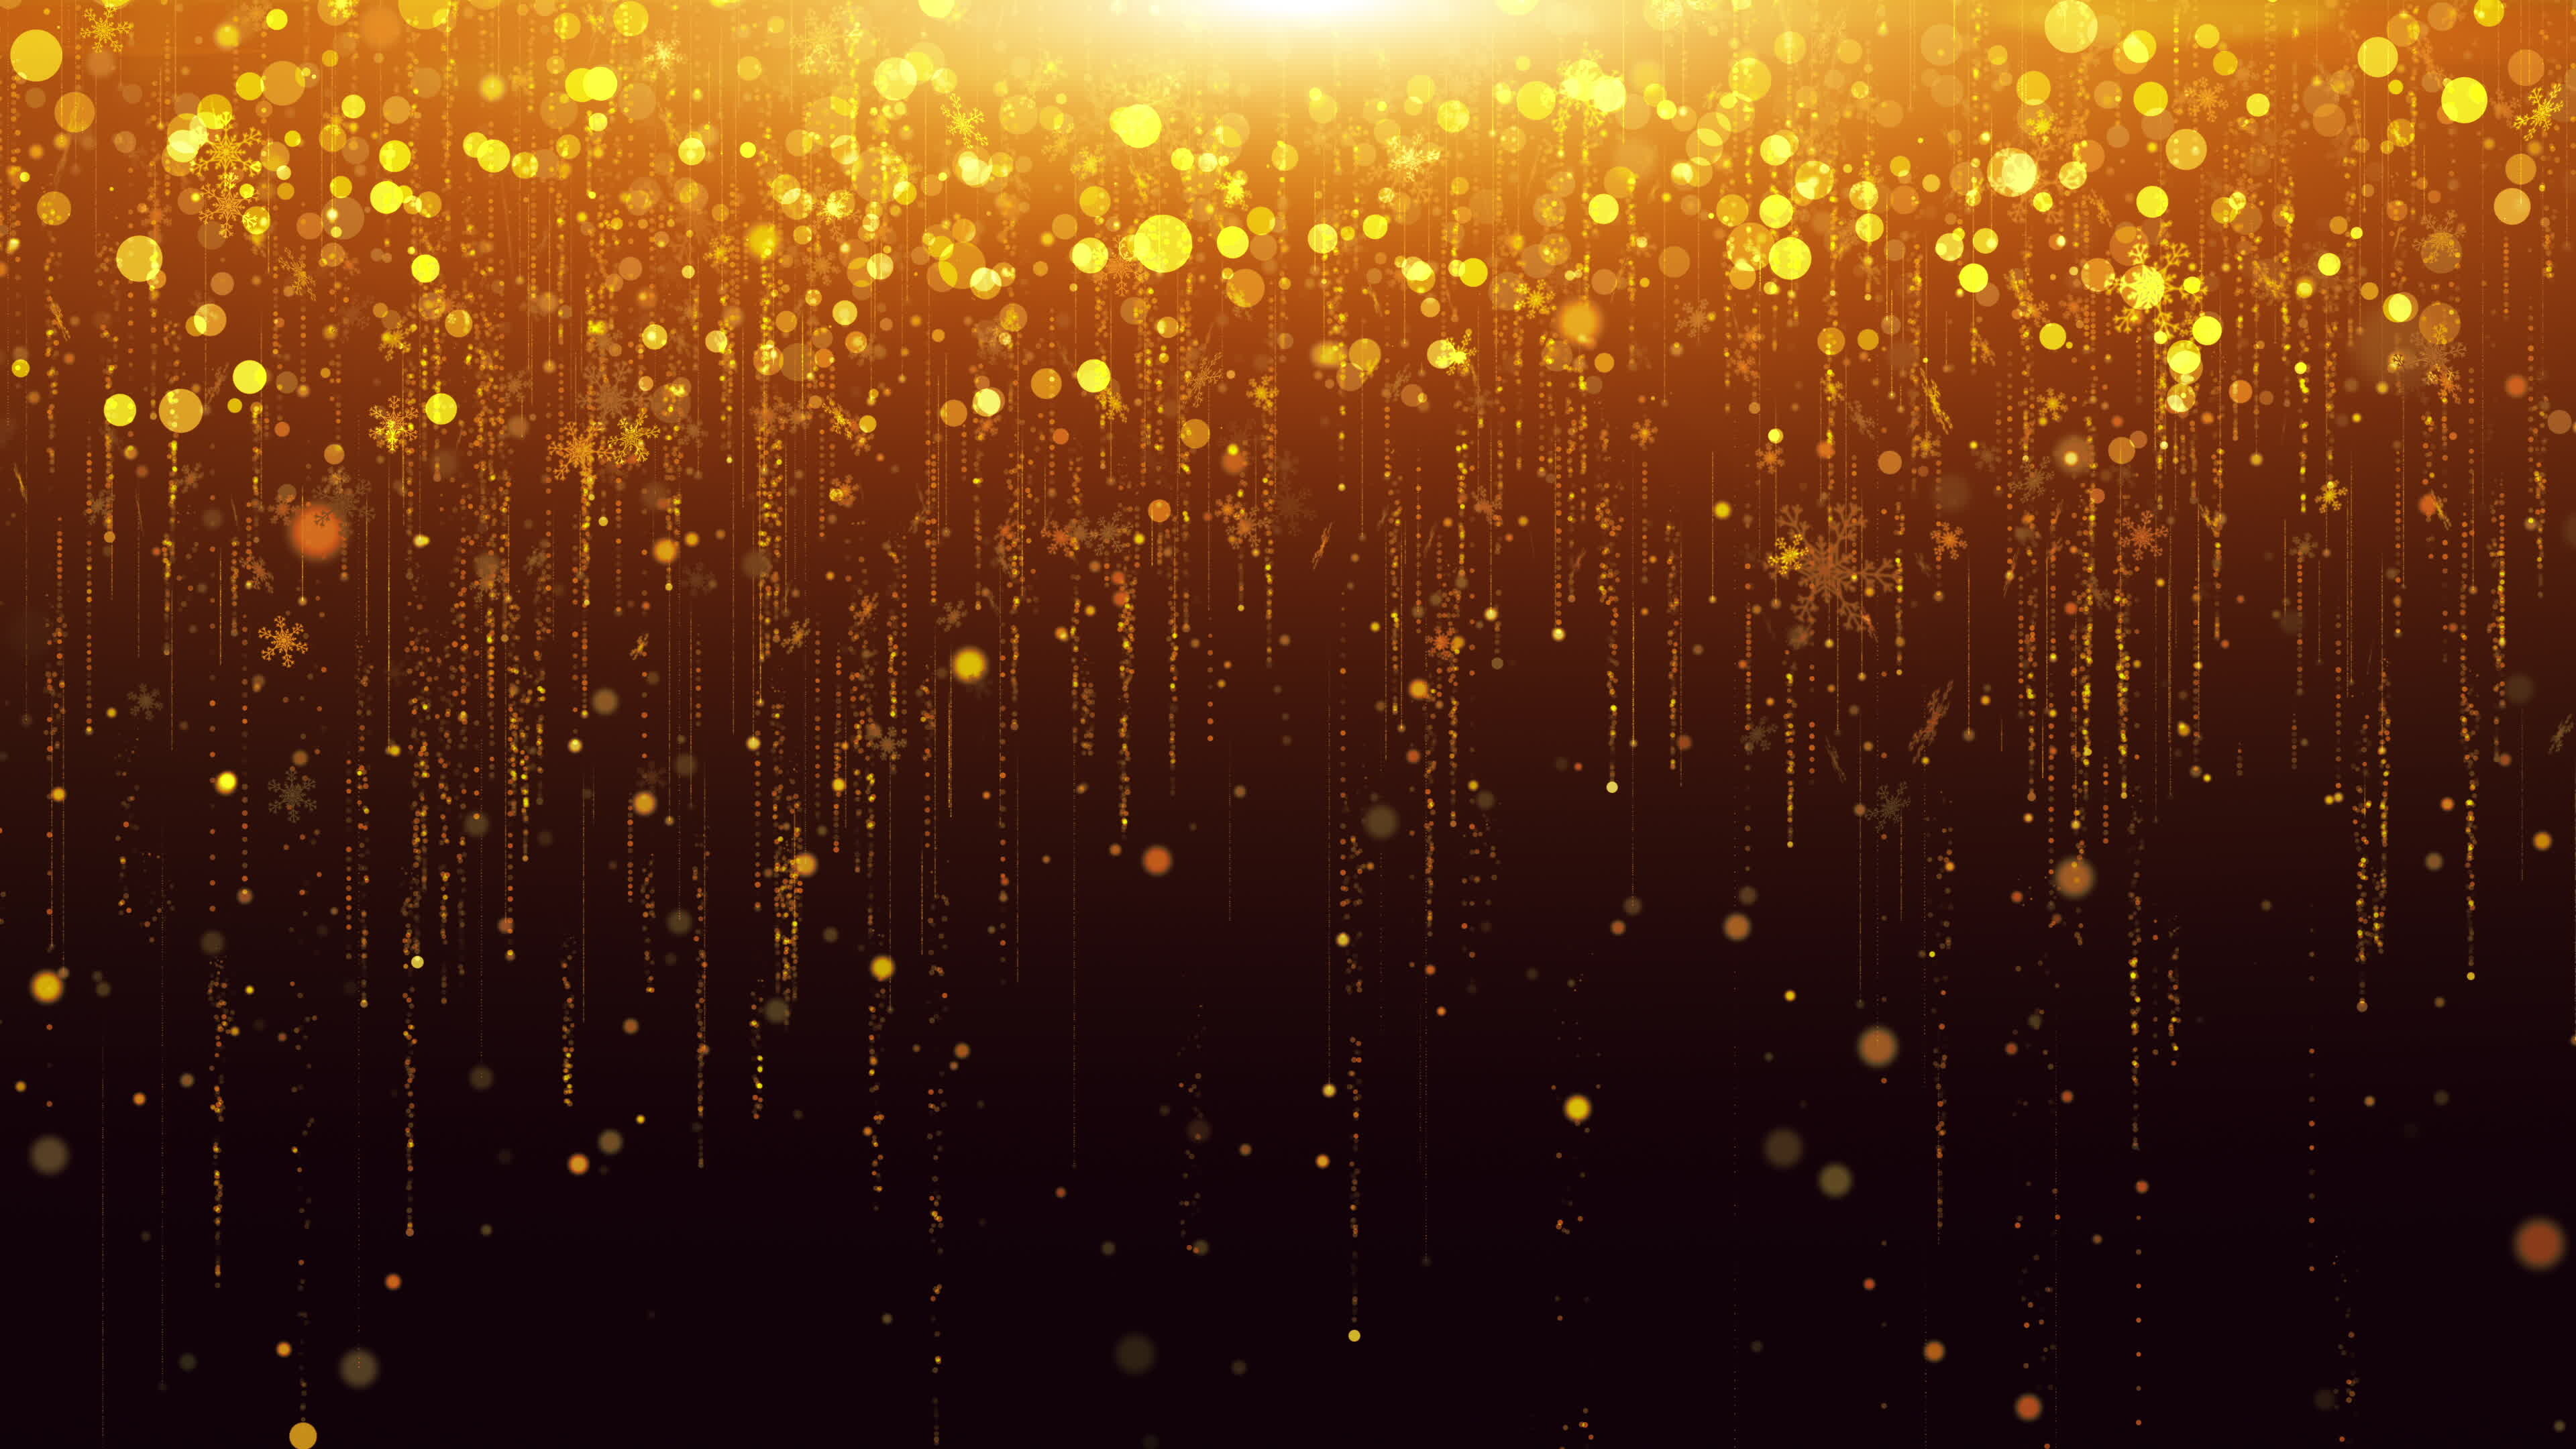 Gold Sparkle: Golden sparkling glitter lines, Bokeh view of colorful holiday lights, Bright light. 3840x2160 4K Wallpaper.